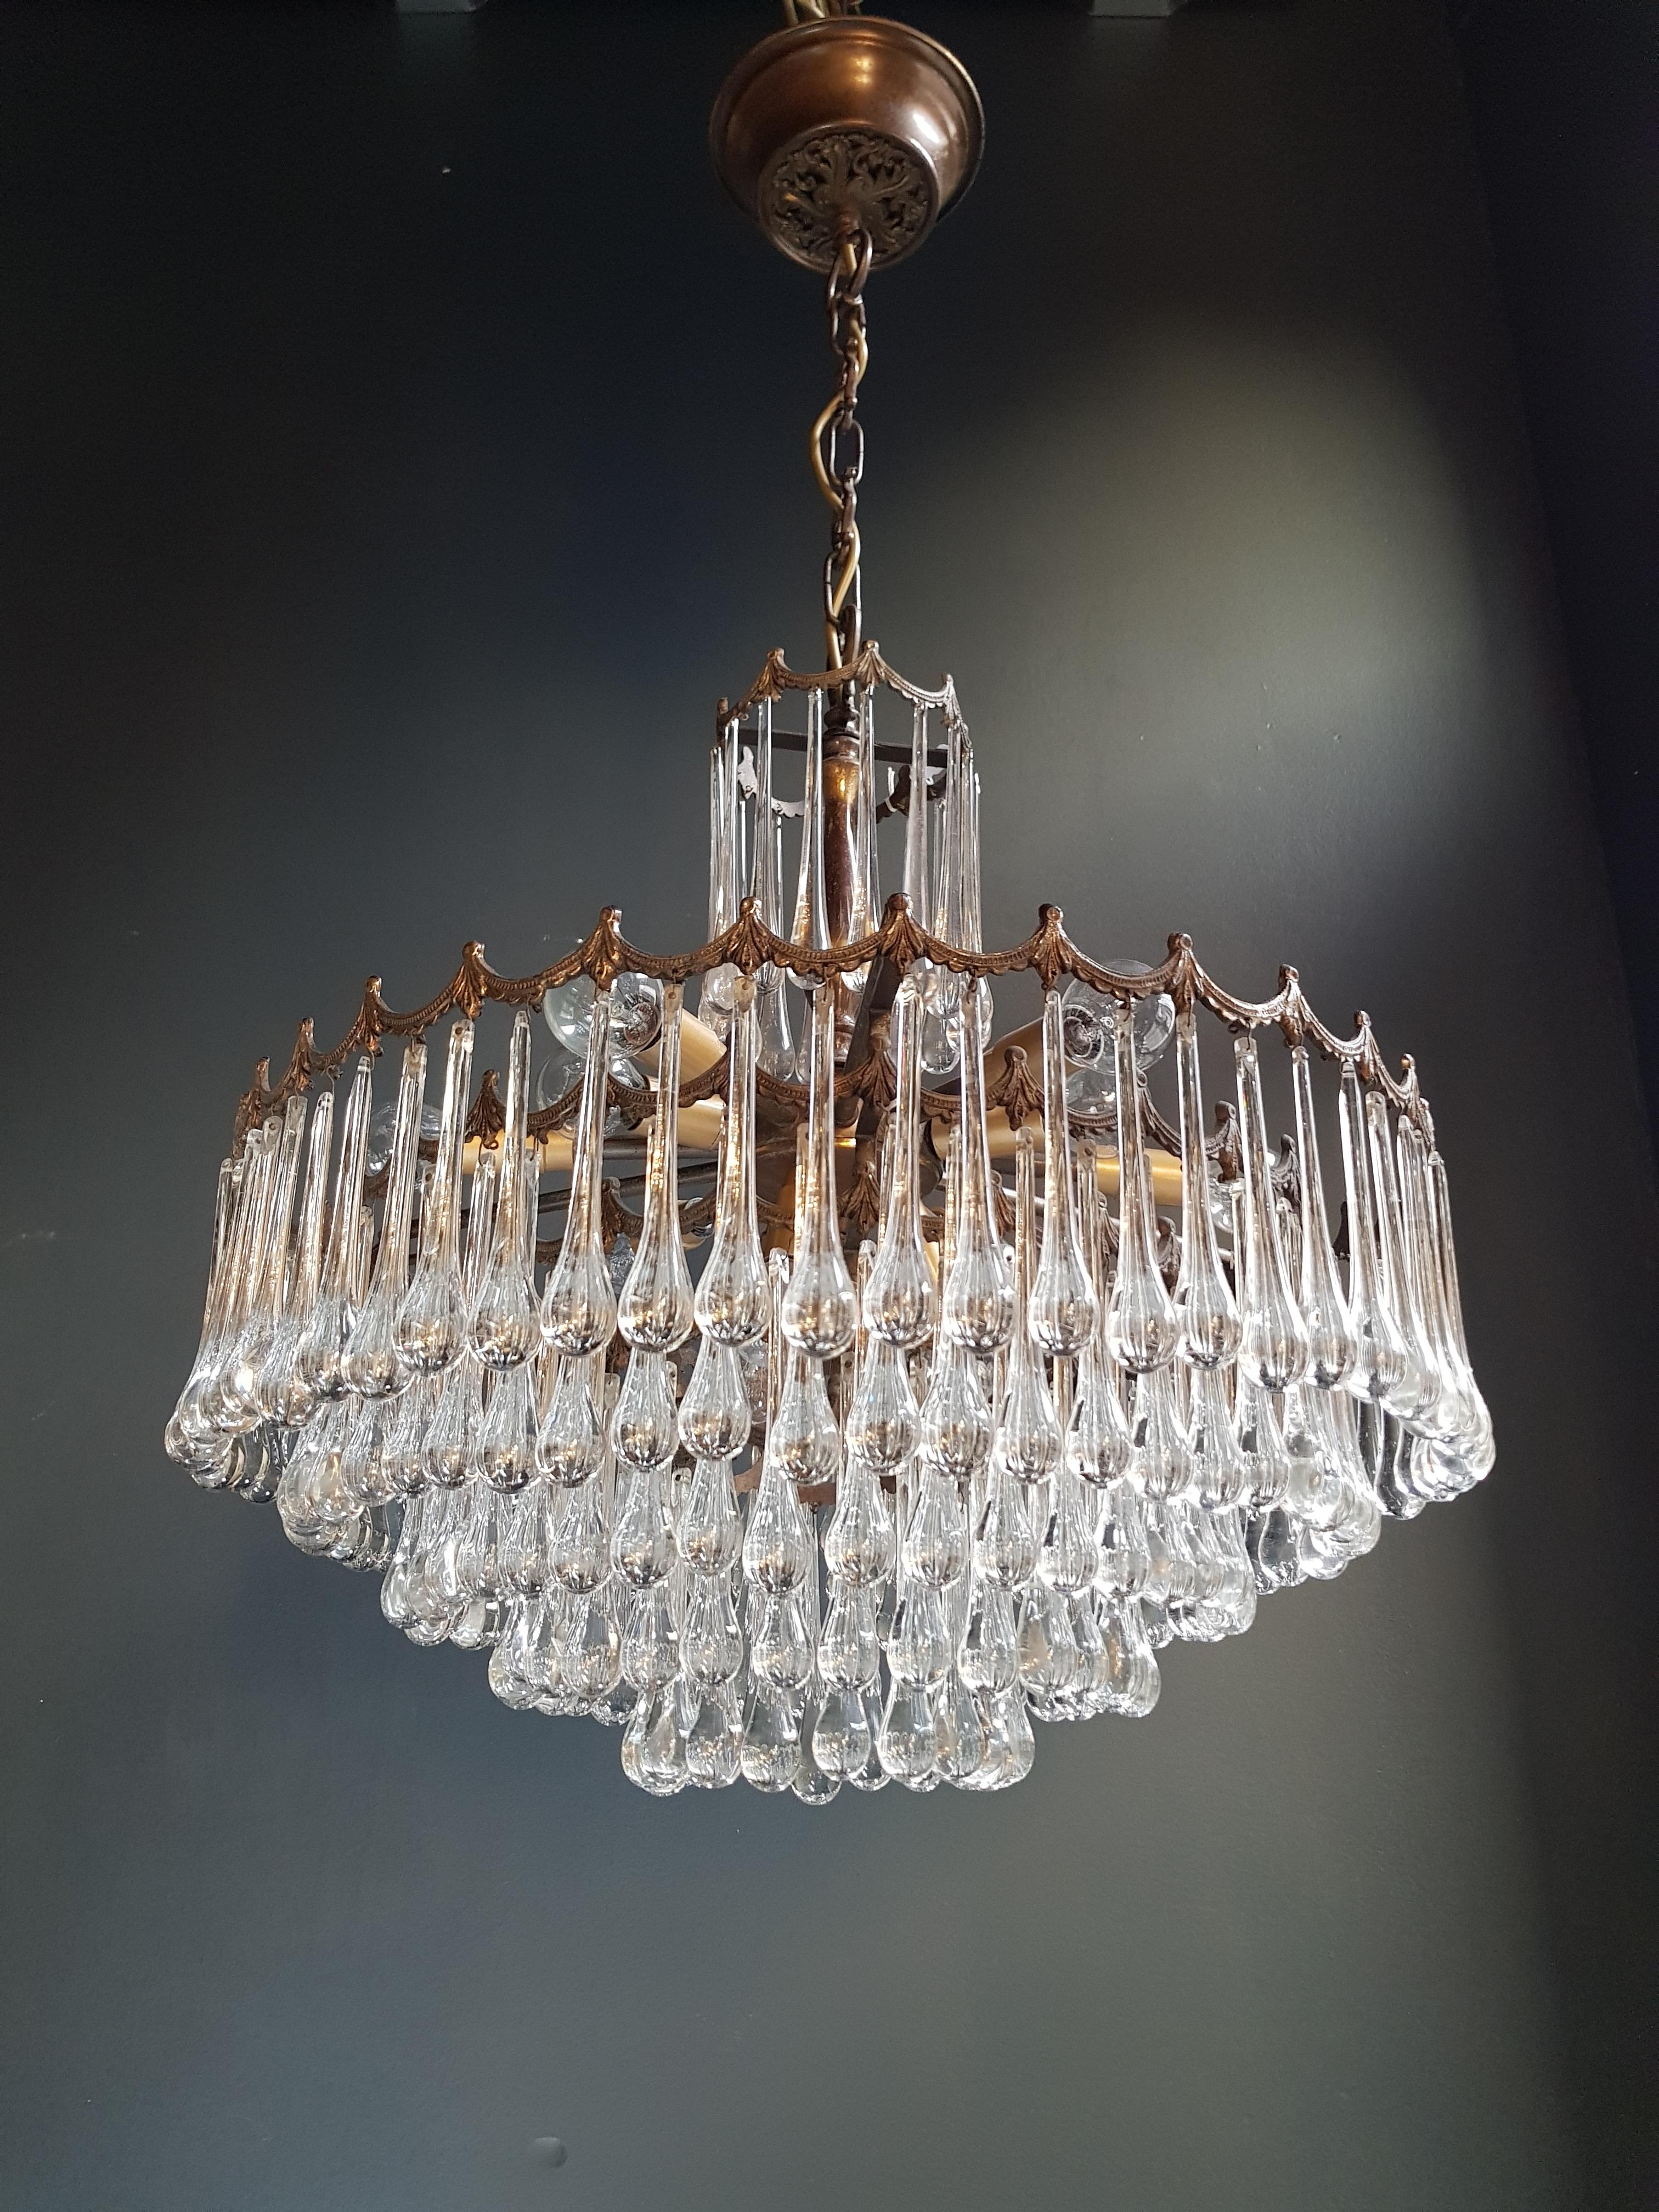 Murano glass modern crystal chandelier antique ceiling lamp lustre brass, 1950s.

Measures: Total height 95 cm, height without chain 53 cm, diameter 55 cm. Weight (approximately): 13 kg.

Number of lights: 12-light bulb sockets: E14 Material: